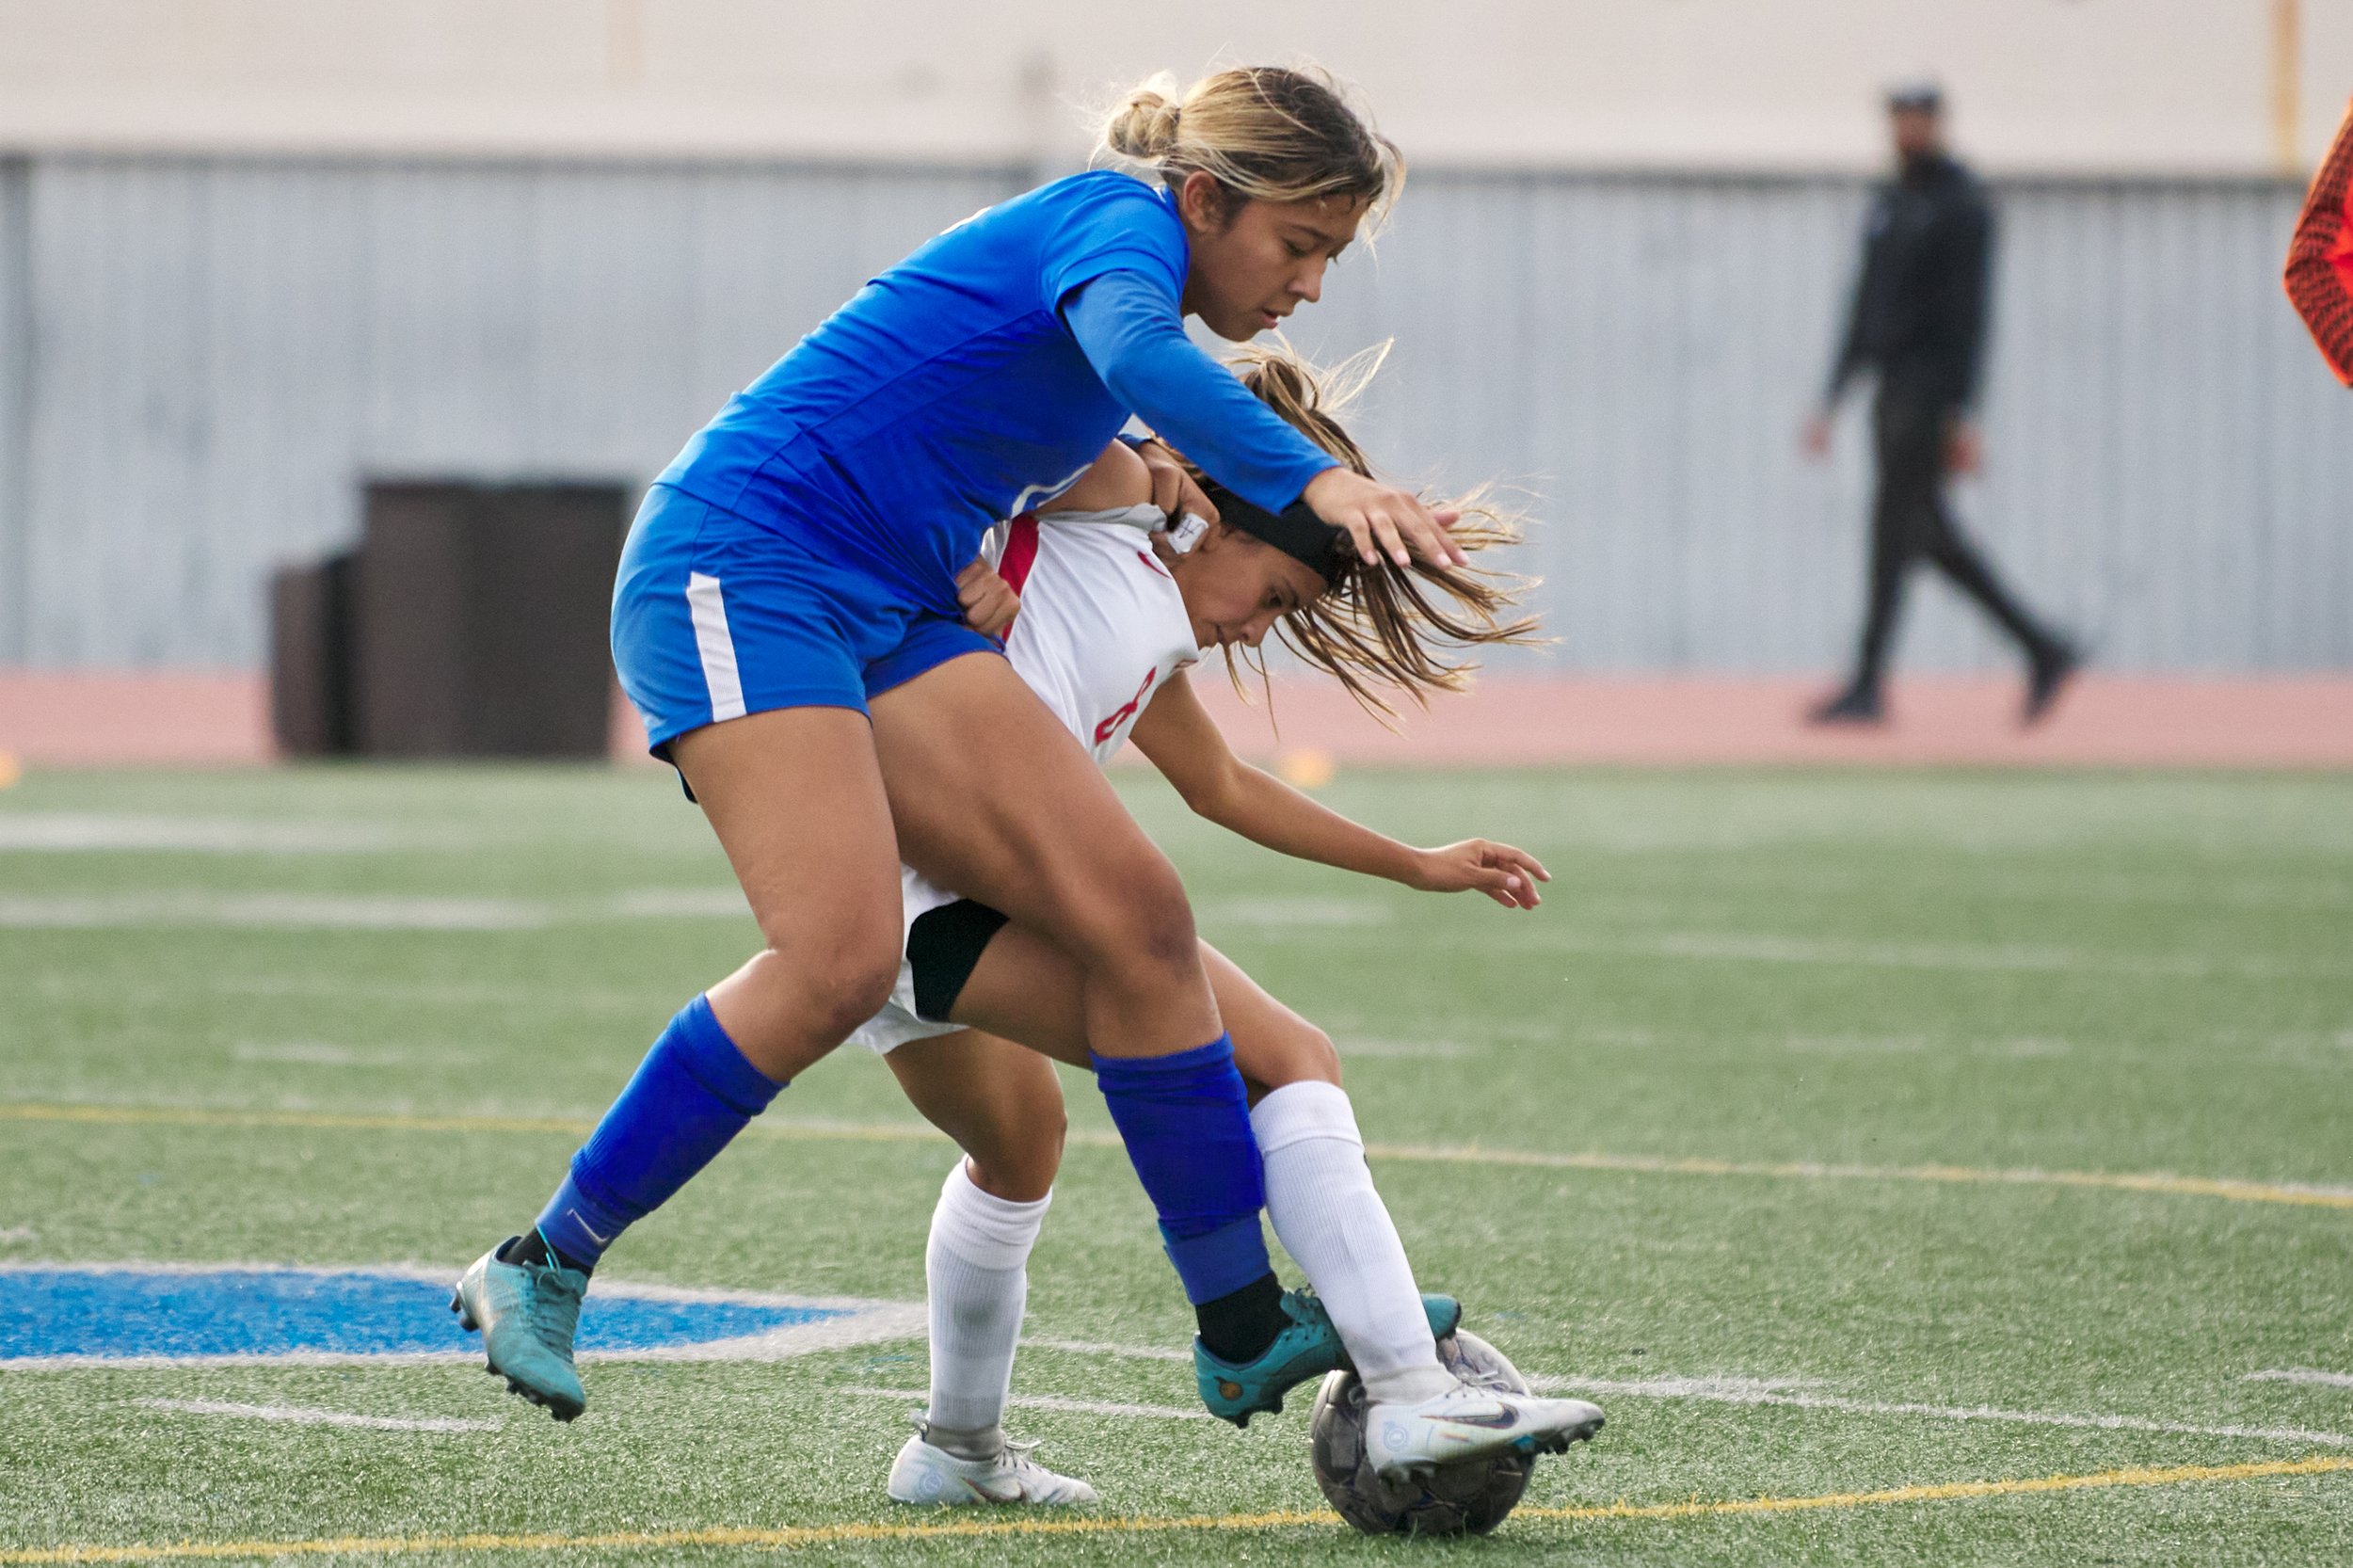  Santa Monica College Corsairs' Jacky Hernandez and Bakersfield College Renegades' Jasmine Hinojosa fight for the ball during the women's soccer match on Friday, Oct. 20, 2022, at Corsair Field in Santa Monica, Calif. The Corsairs tied 1-1. (Nicholas